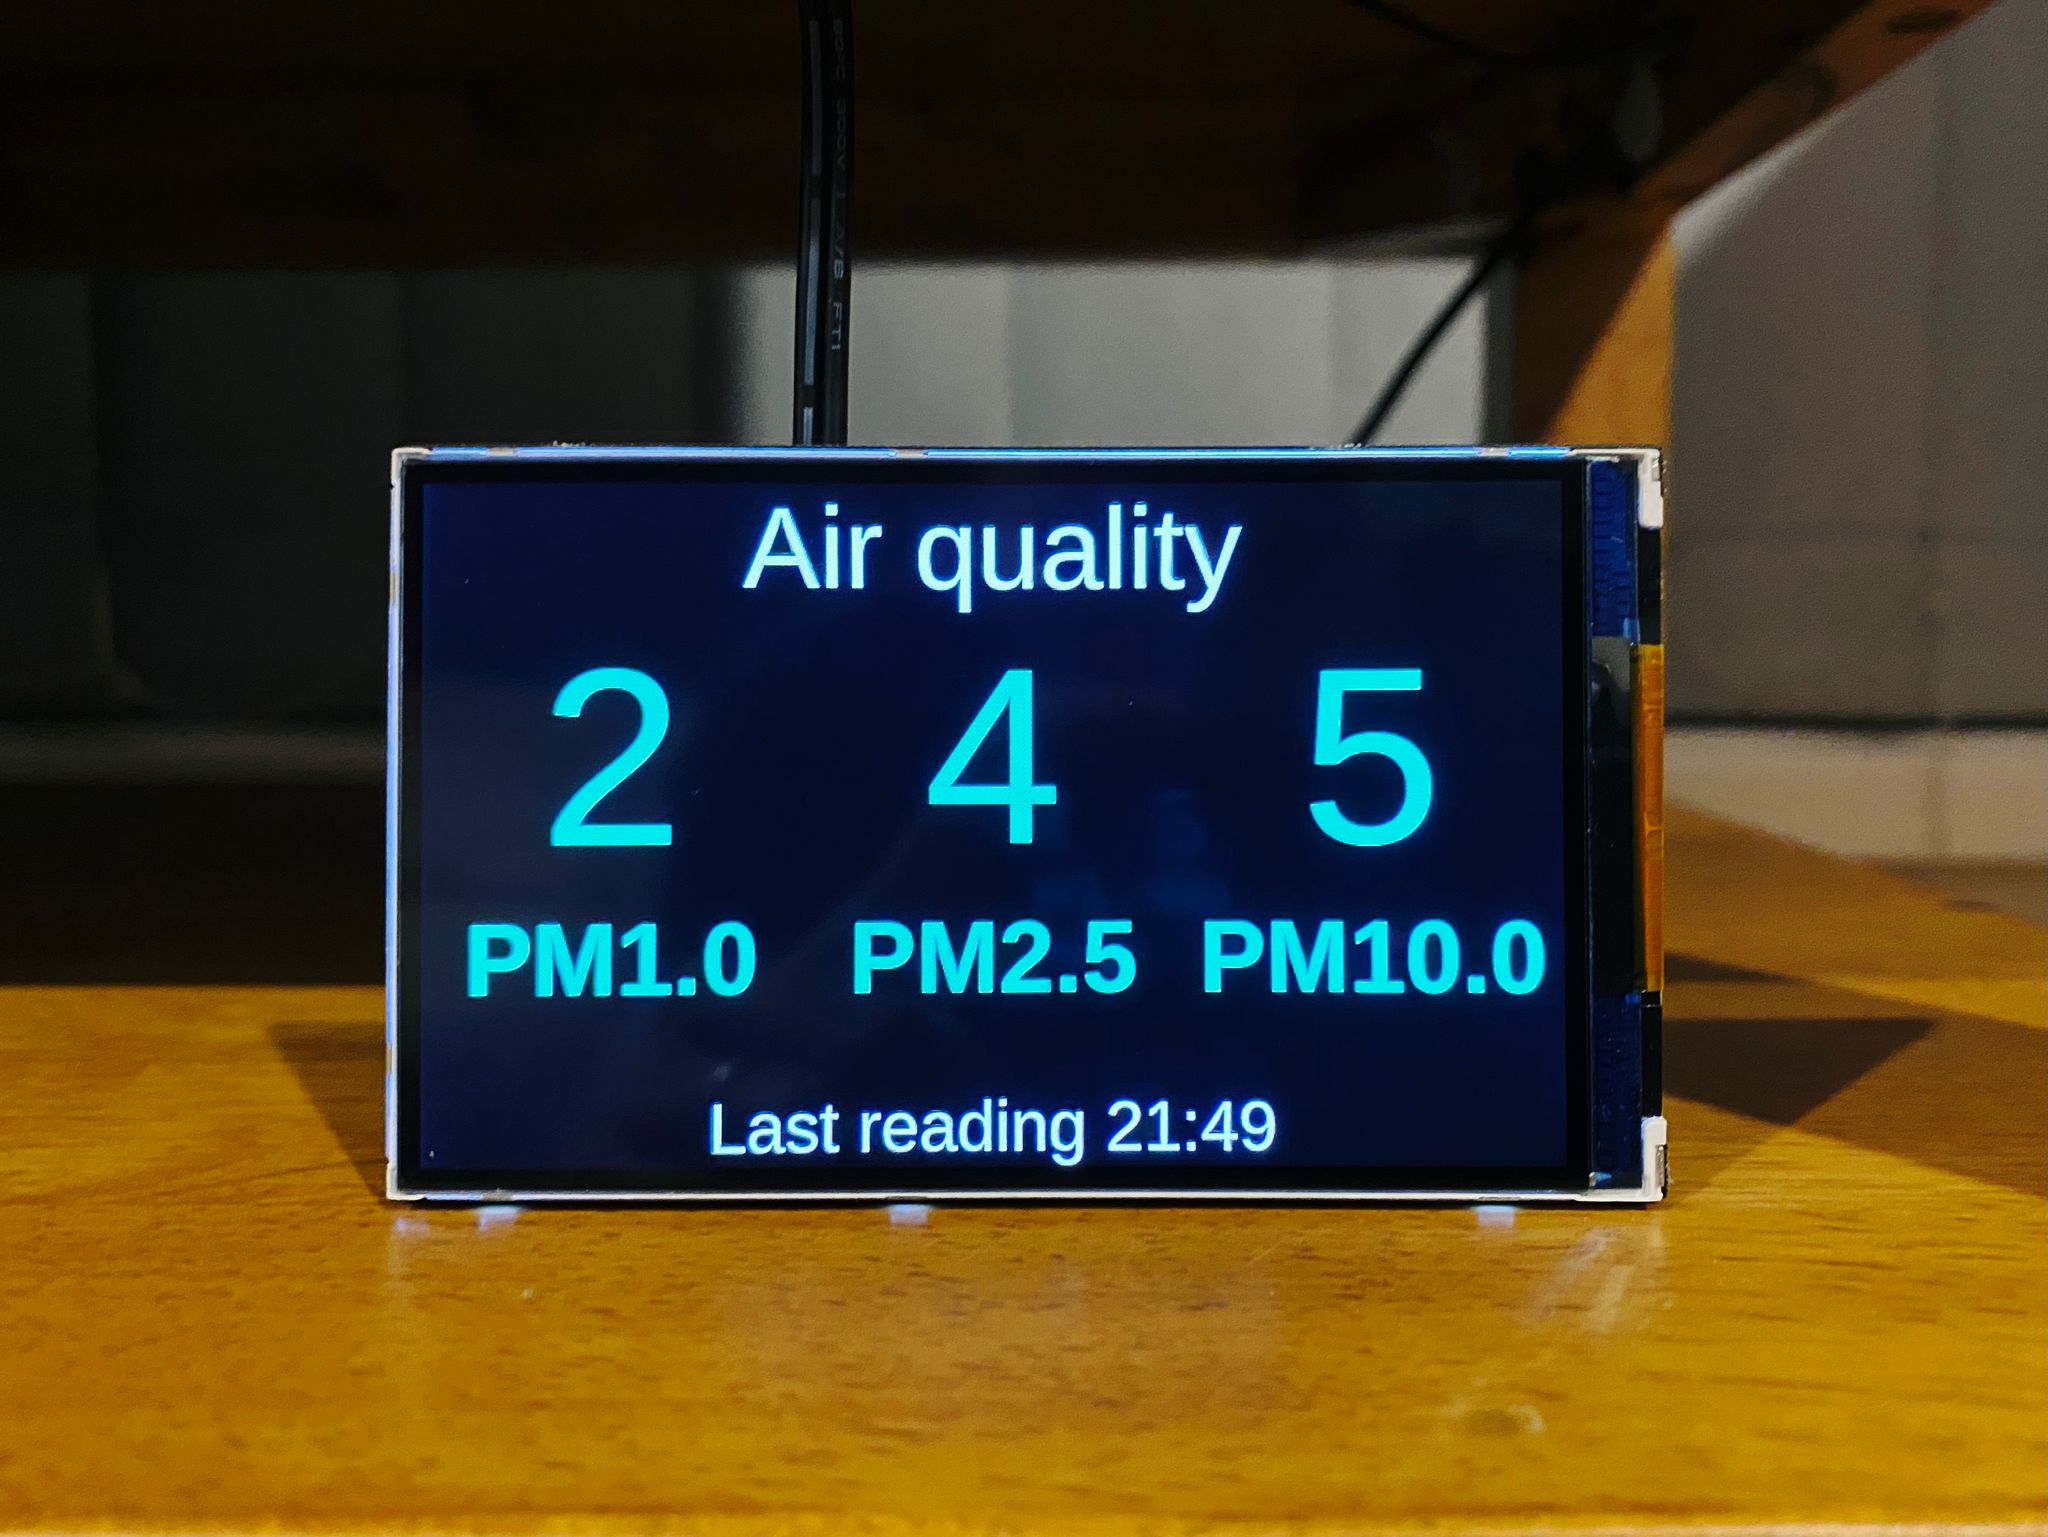 A photo of a 4" LCD display sitting on a shelf, showing PM1.0, PM2.5, and PM10 values.